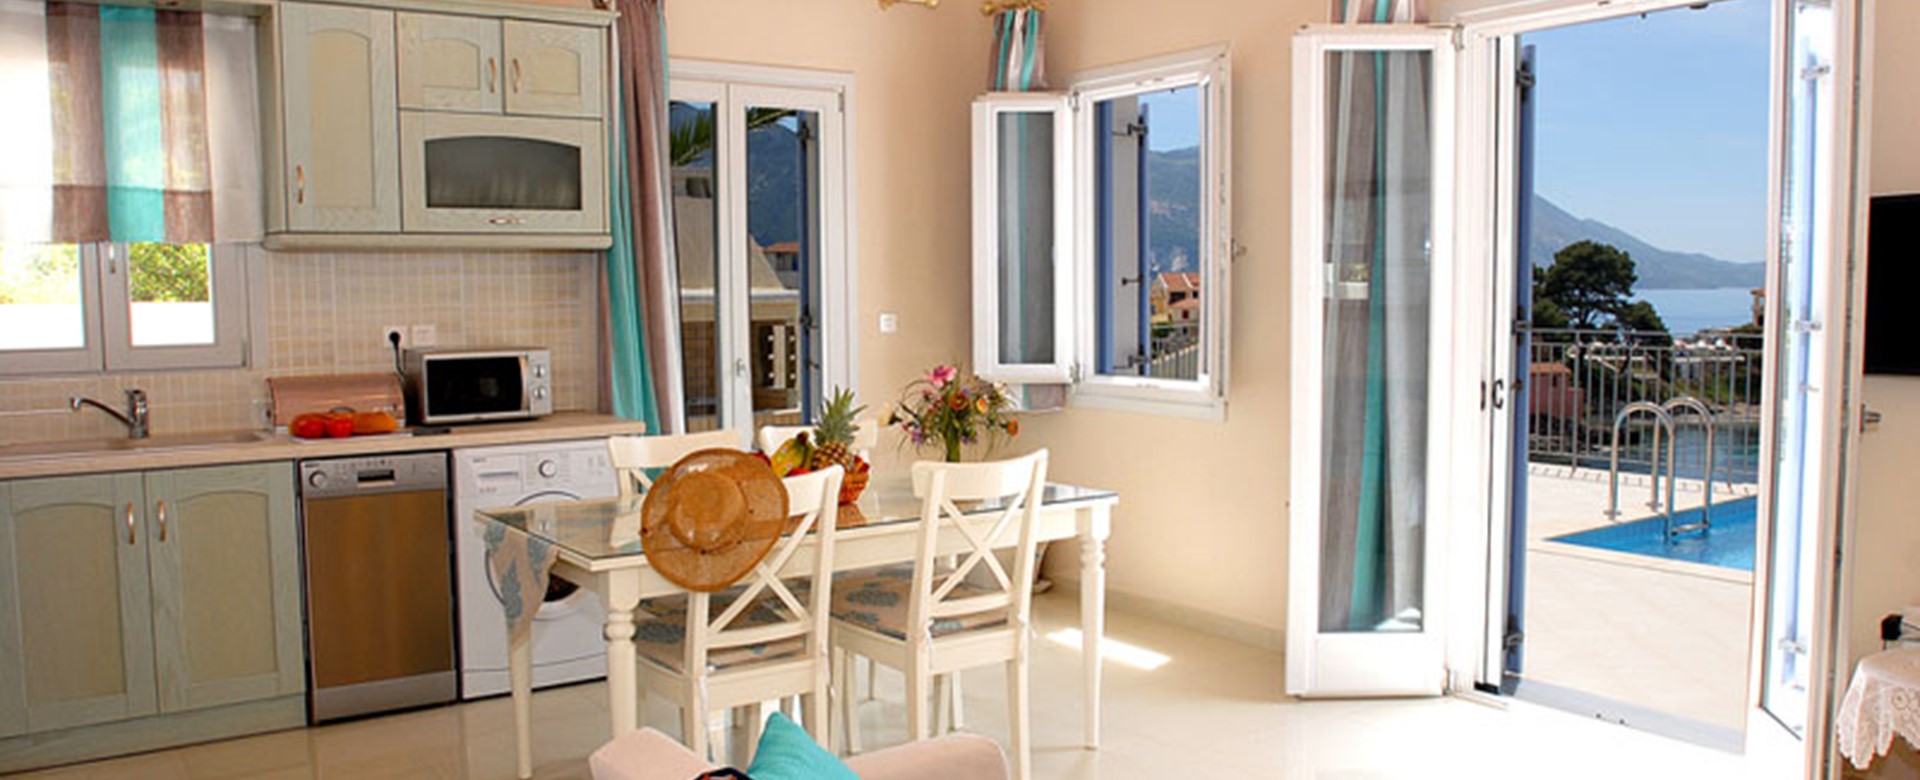 Dining and kitchen with French doors and view out into the bay, Villa Panorama, Assos, Kefalonia